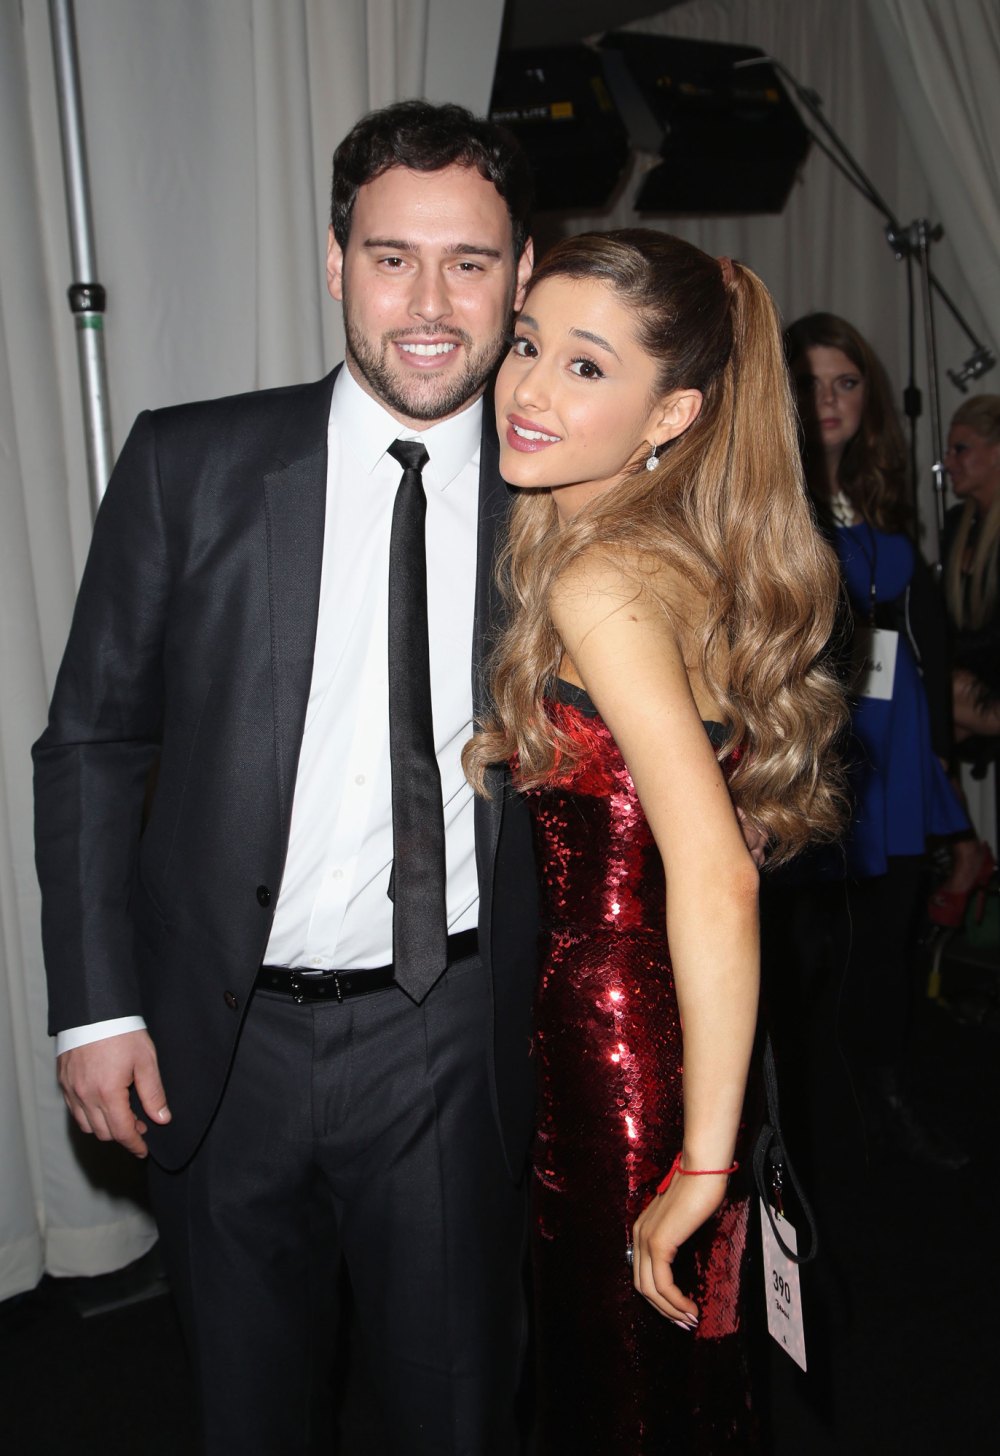 Ariana Grande Parts Ways With Music Manager Scooter Braun